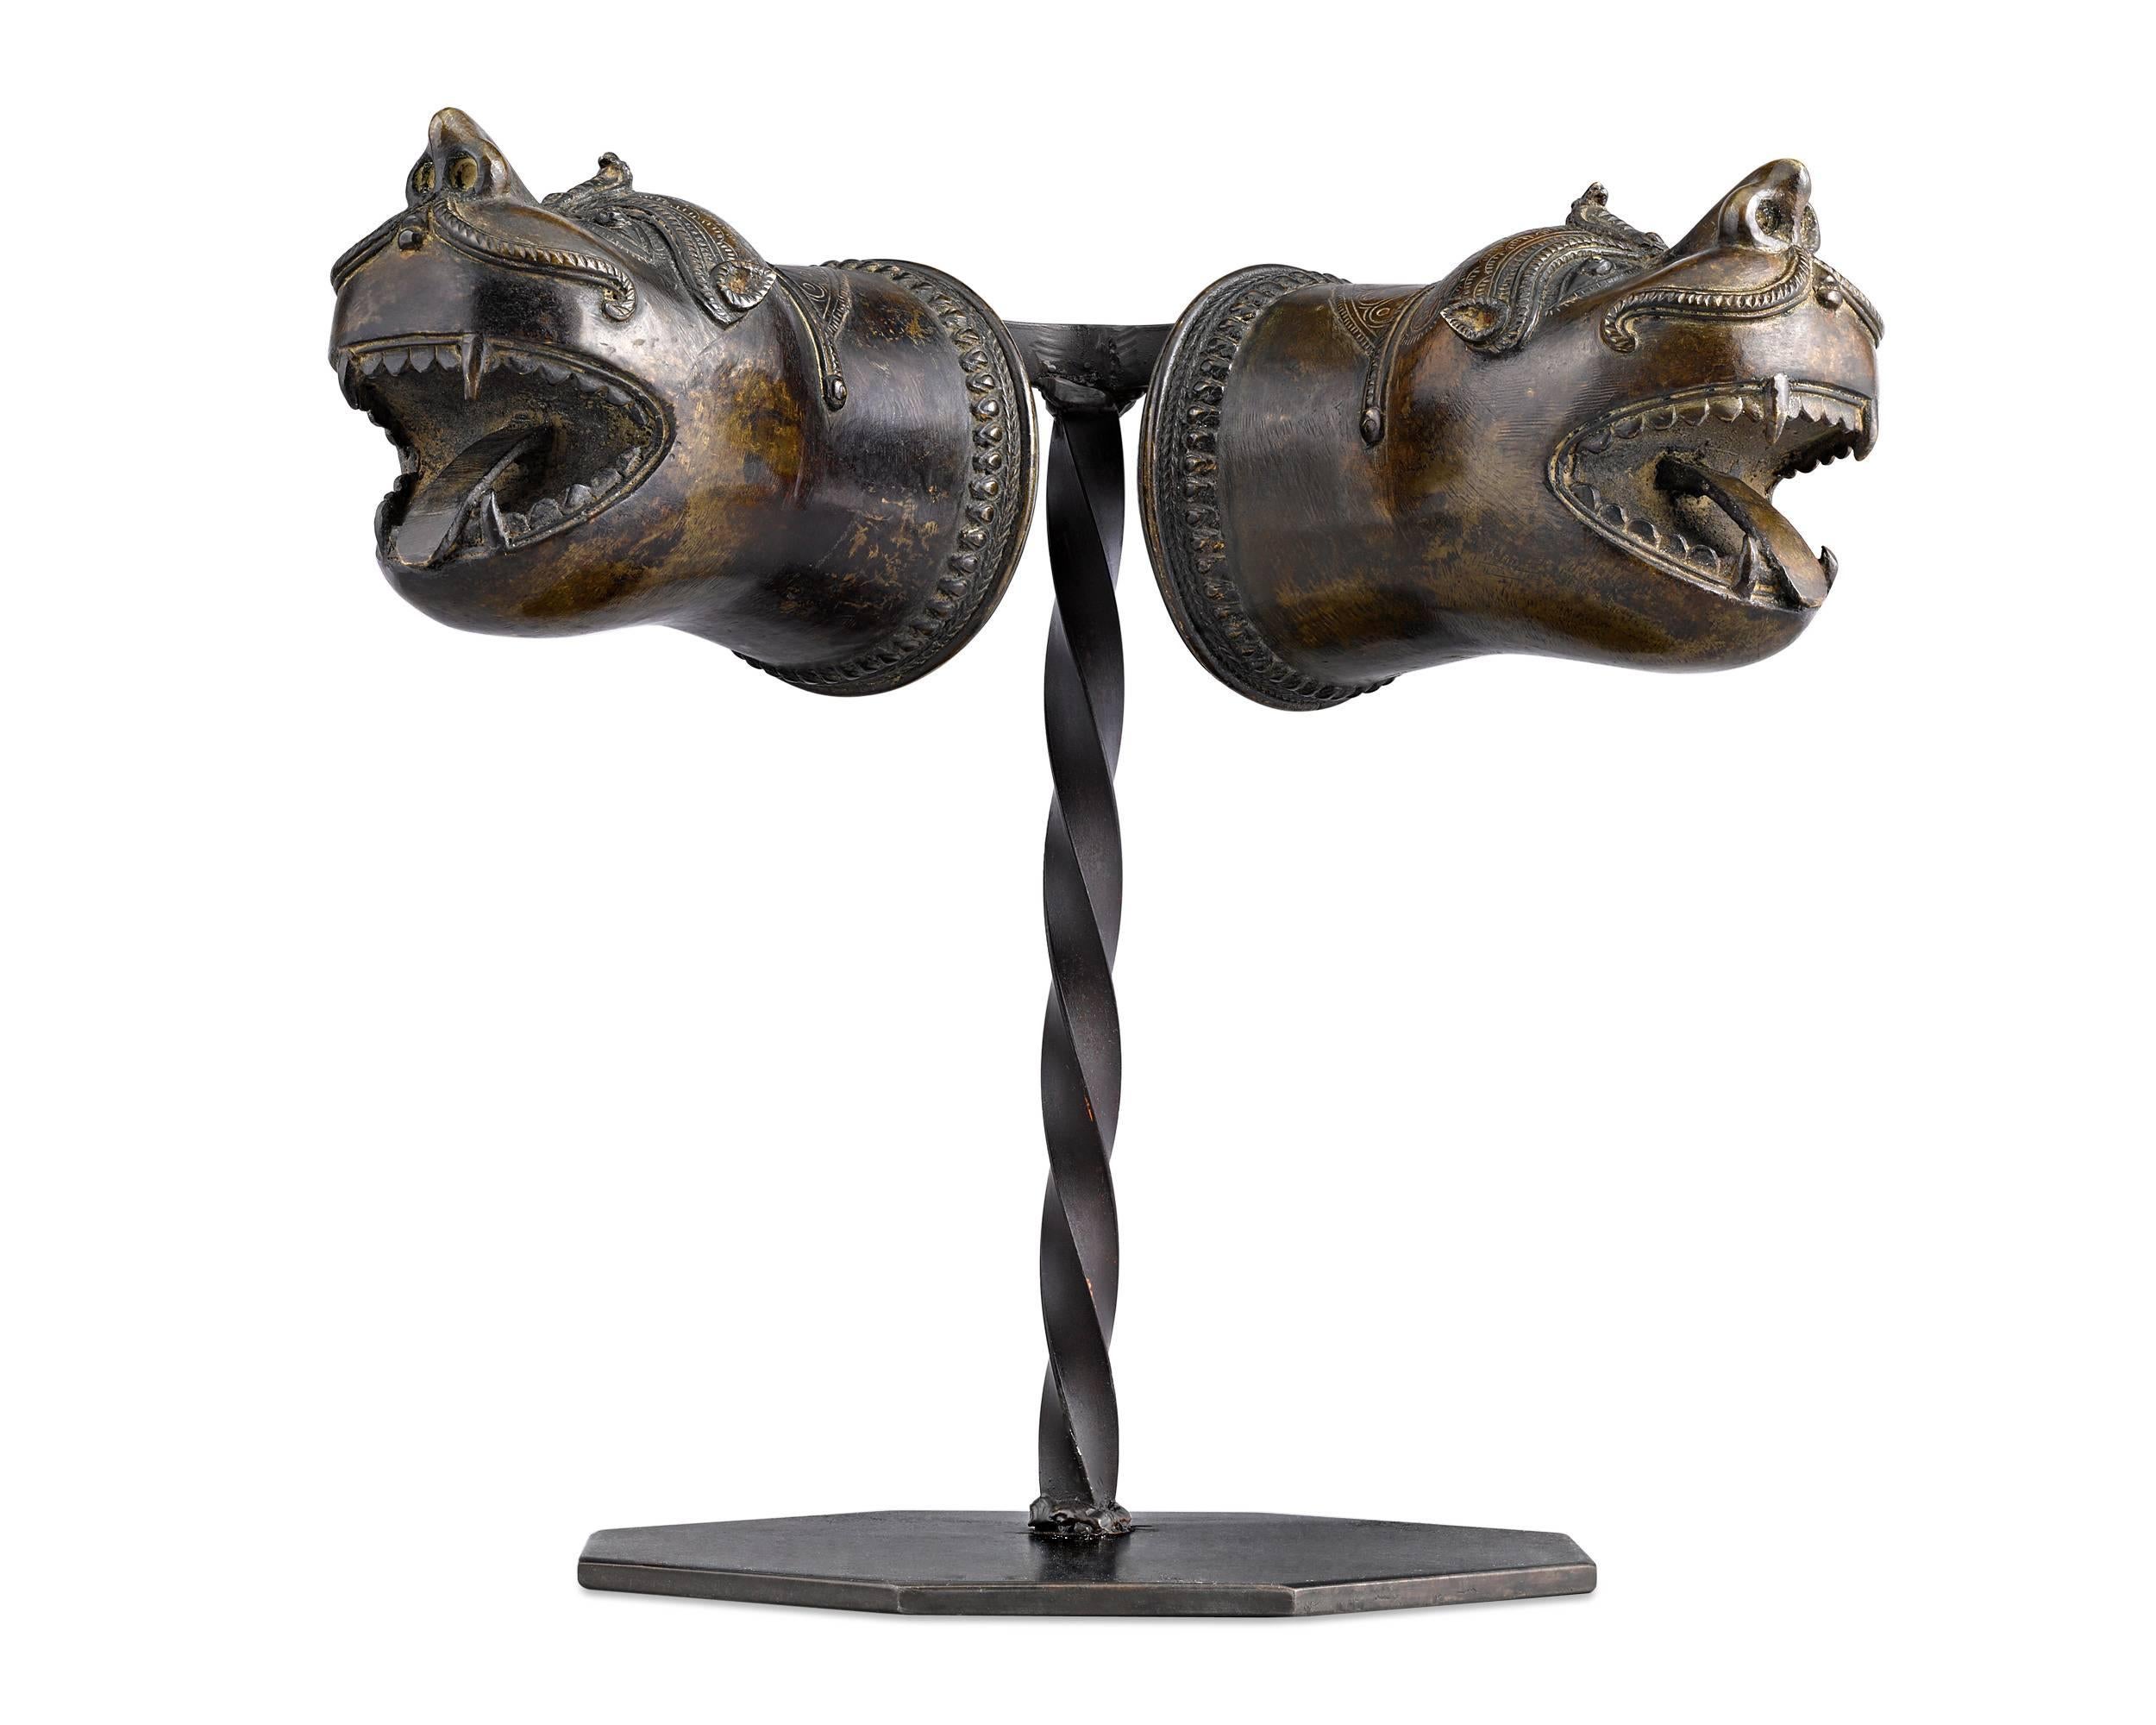 Beautifully stylized and crafted in the form of fierce leopards are these exceptional 18th century Indian bronze palanquin finials. Palanquin, or “palki”, are litter-type conveyances that have been in use in India for centuries. These finials would